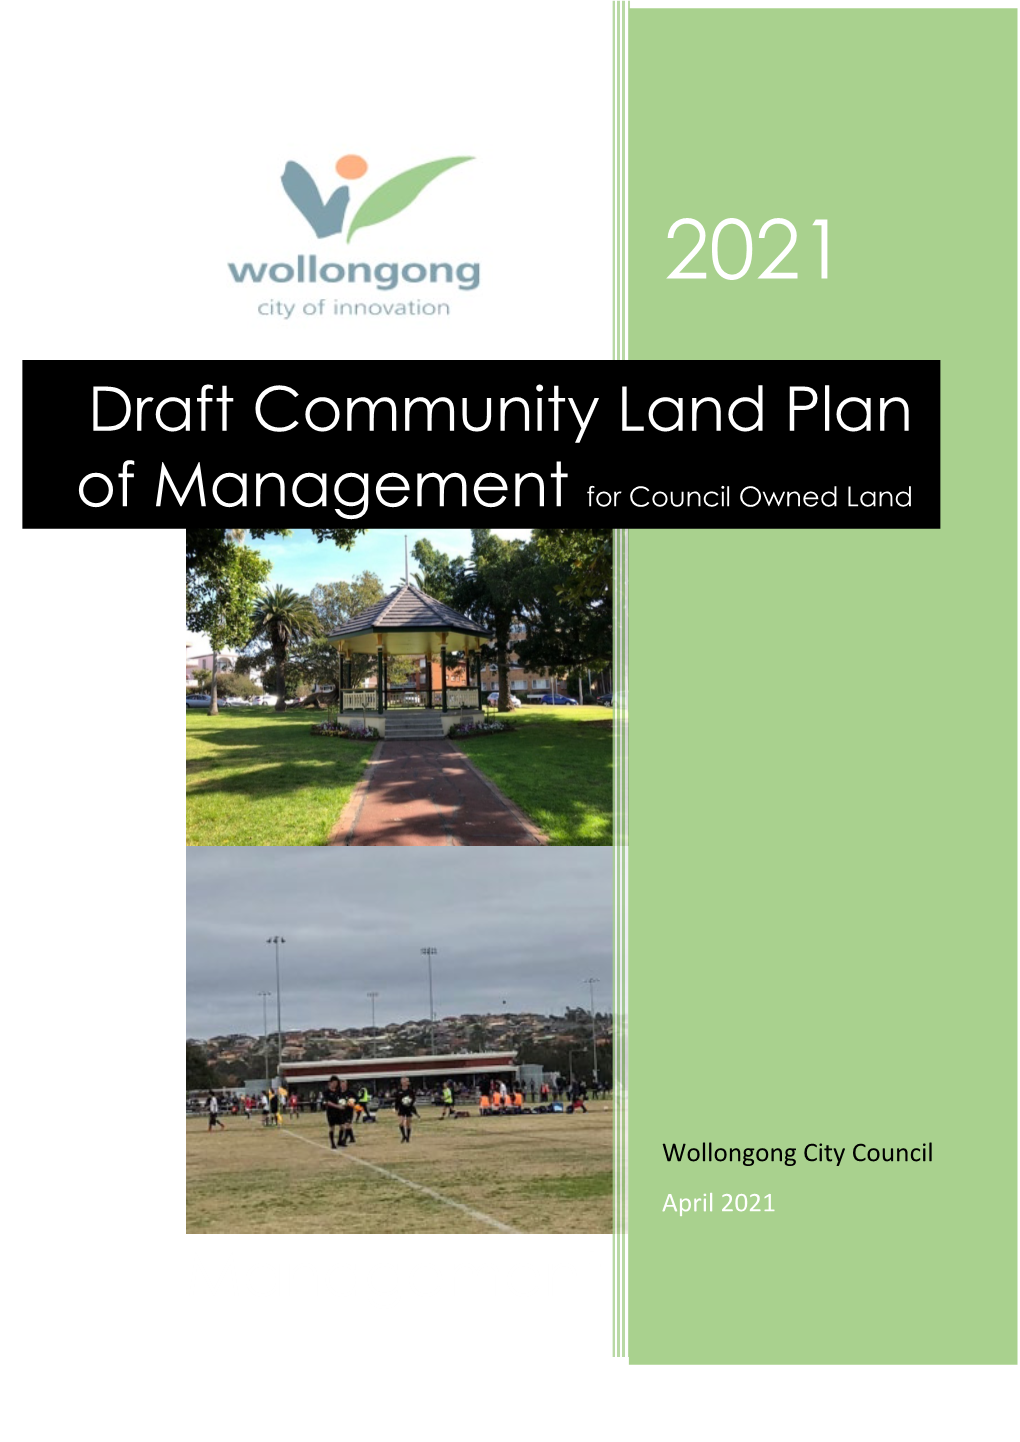 Draft Community Land Plan of Management for Council Owned Land